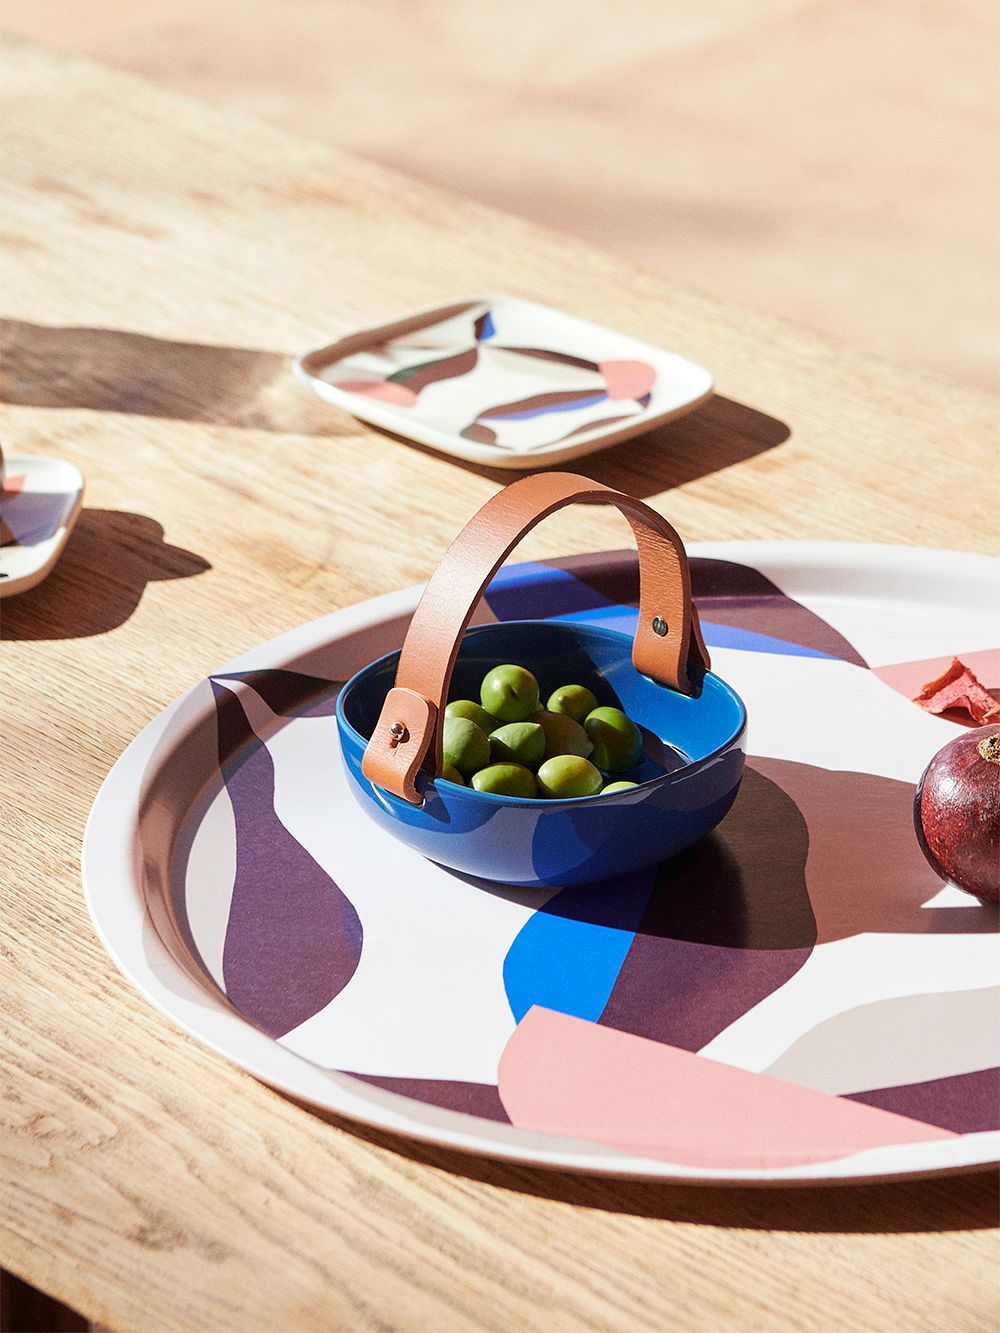 An image of Marimekko's Berry tray and Pikku Koppa serving dish in electric blue, as part of a table setting.